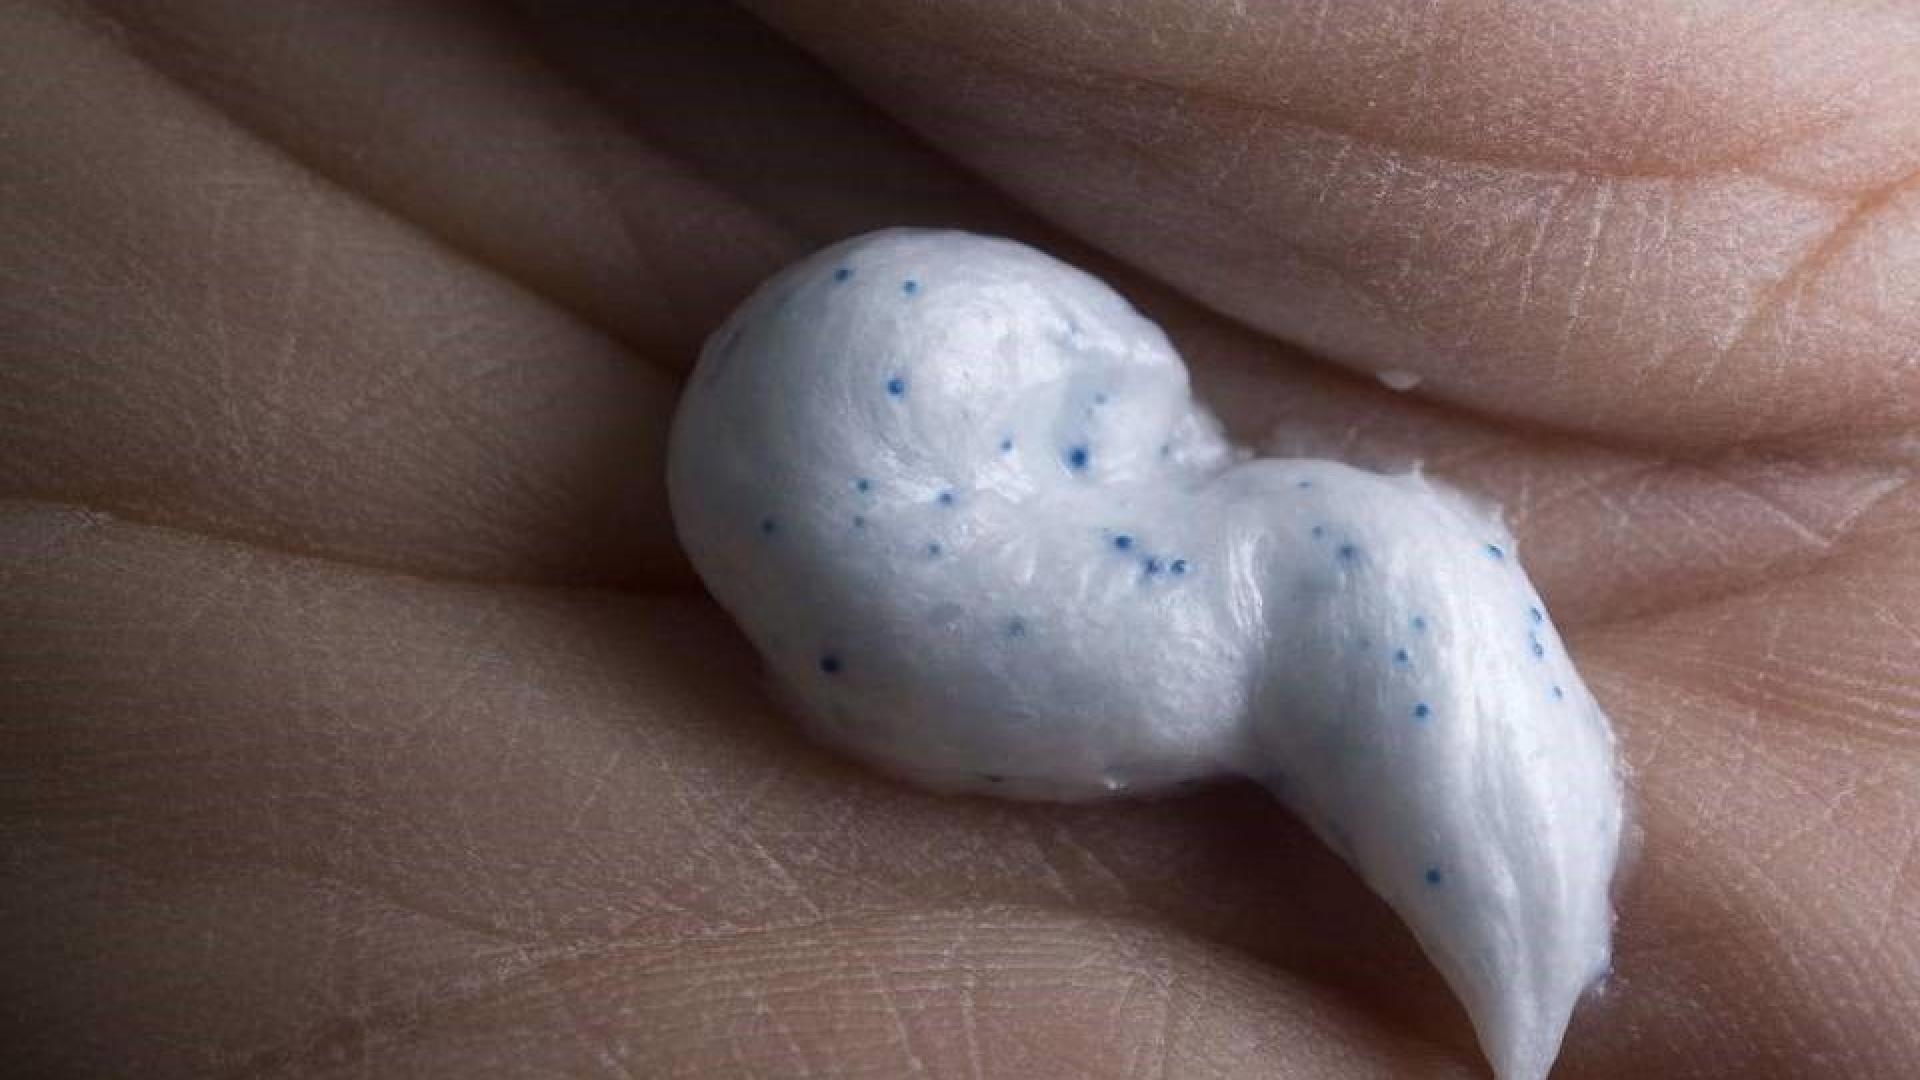 Water Matters - Microbeads in toothpaste